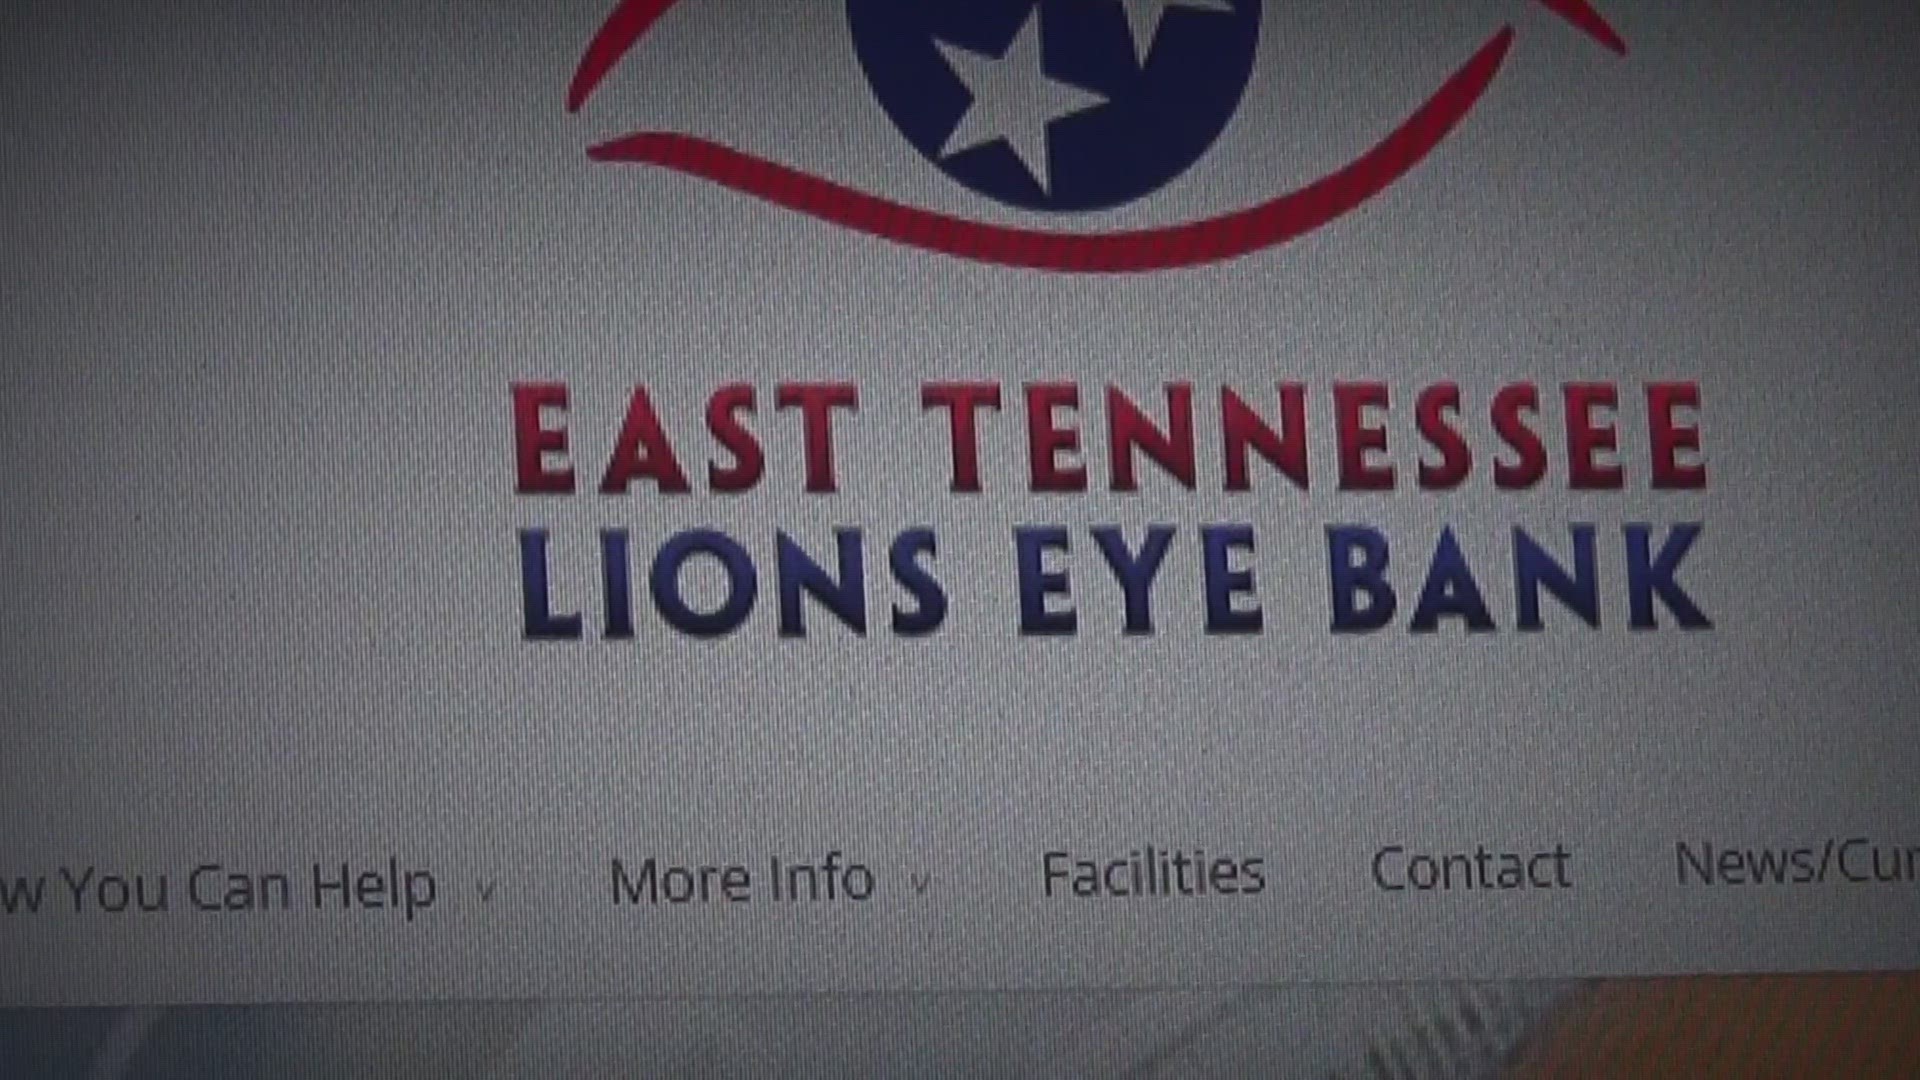 Our investigation revealed the East Tennessee Lions Eye Bank executive director is the highest paid in the country, prompting questions about what pay is proper.